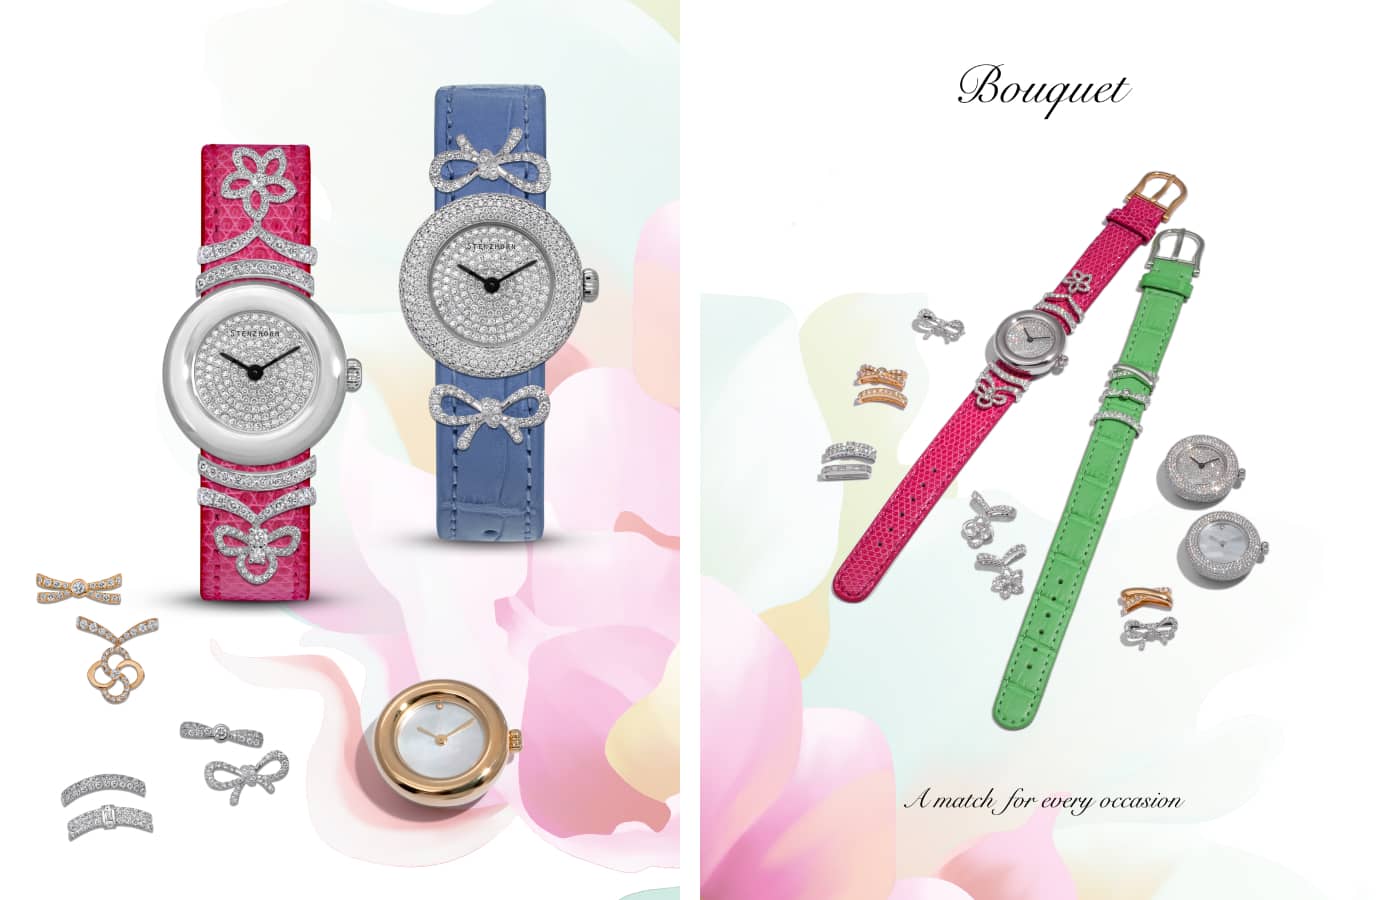 Stenzhorn Bouquet Watches with diamond pave dials and matching gold and white gold charms